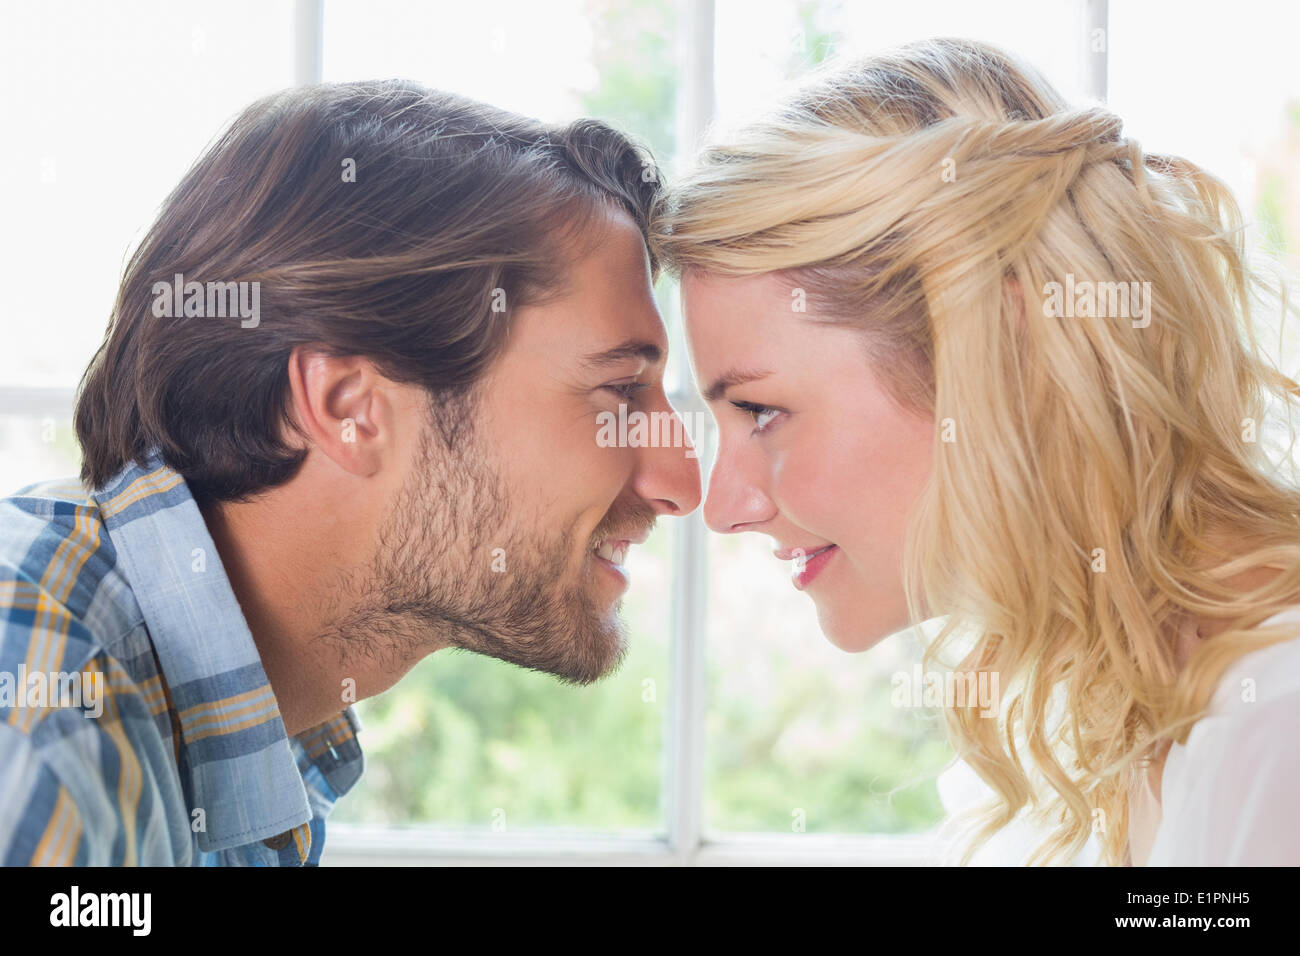 Cute affectionate couple facing each other Stock Photo